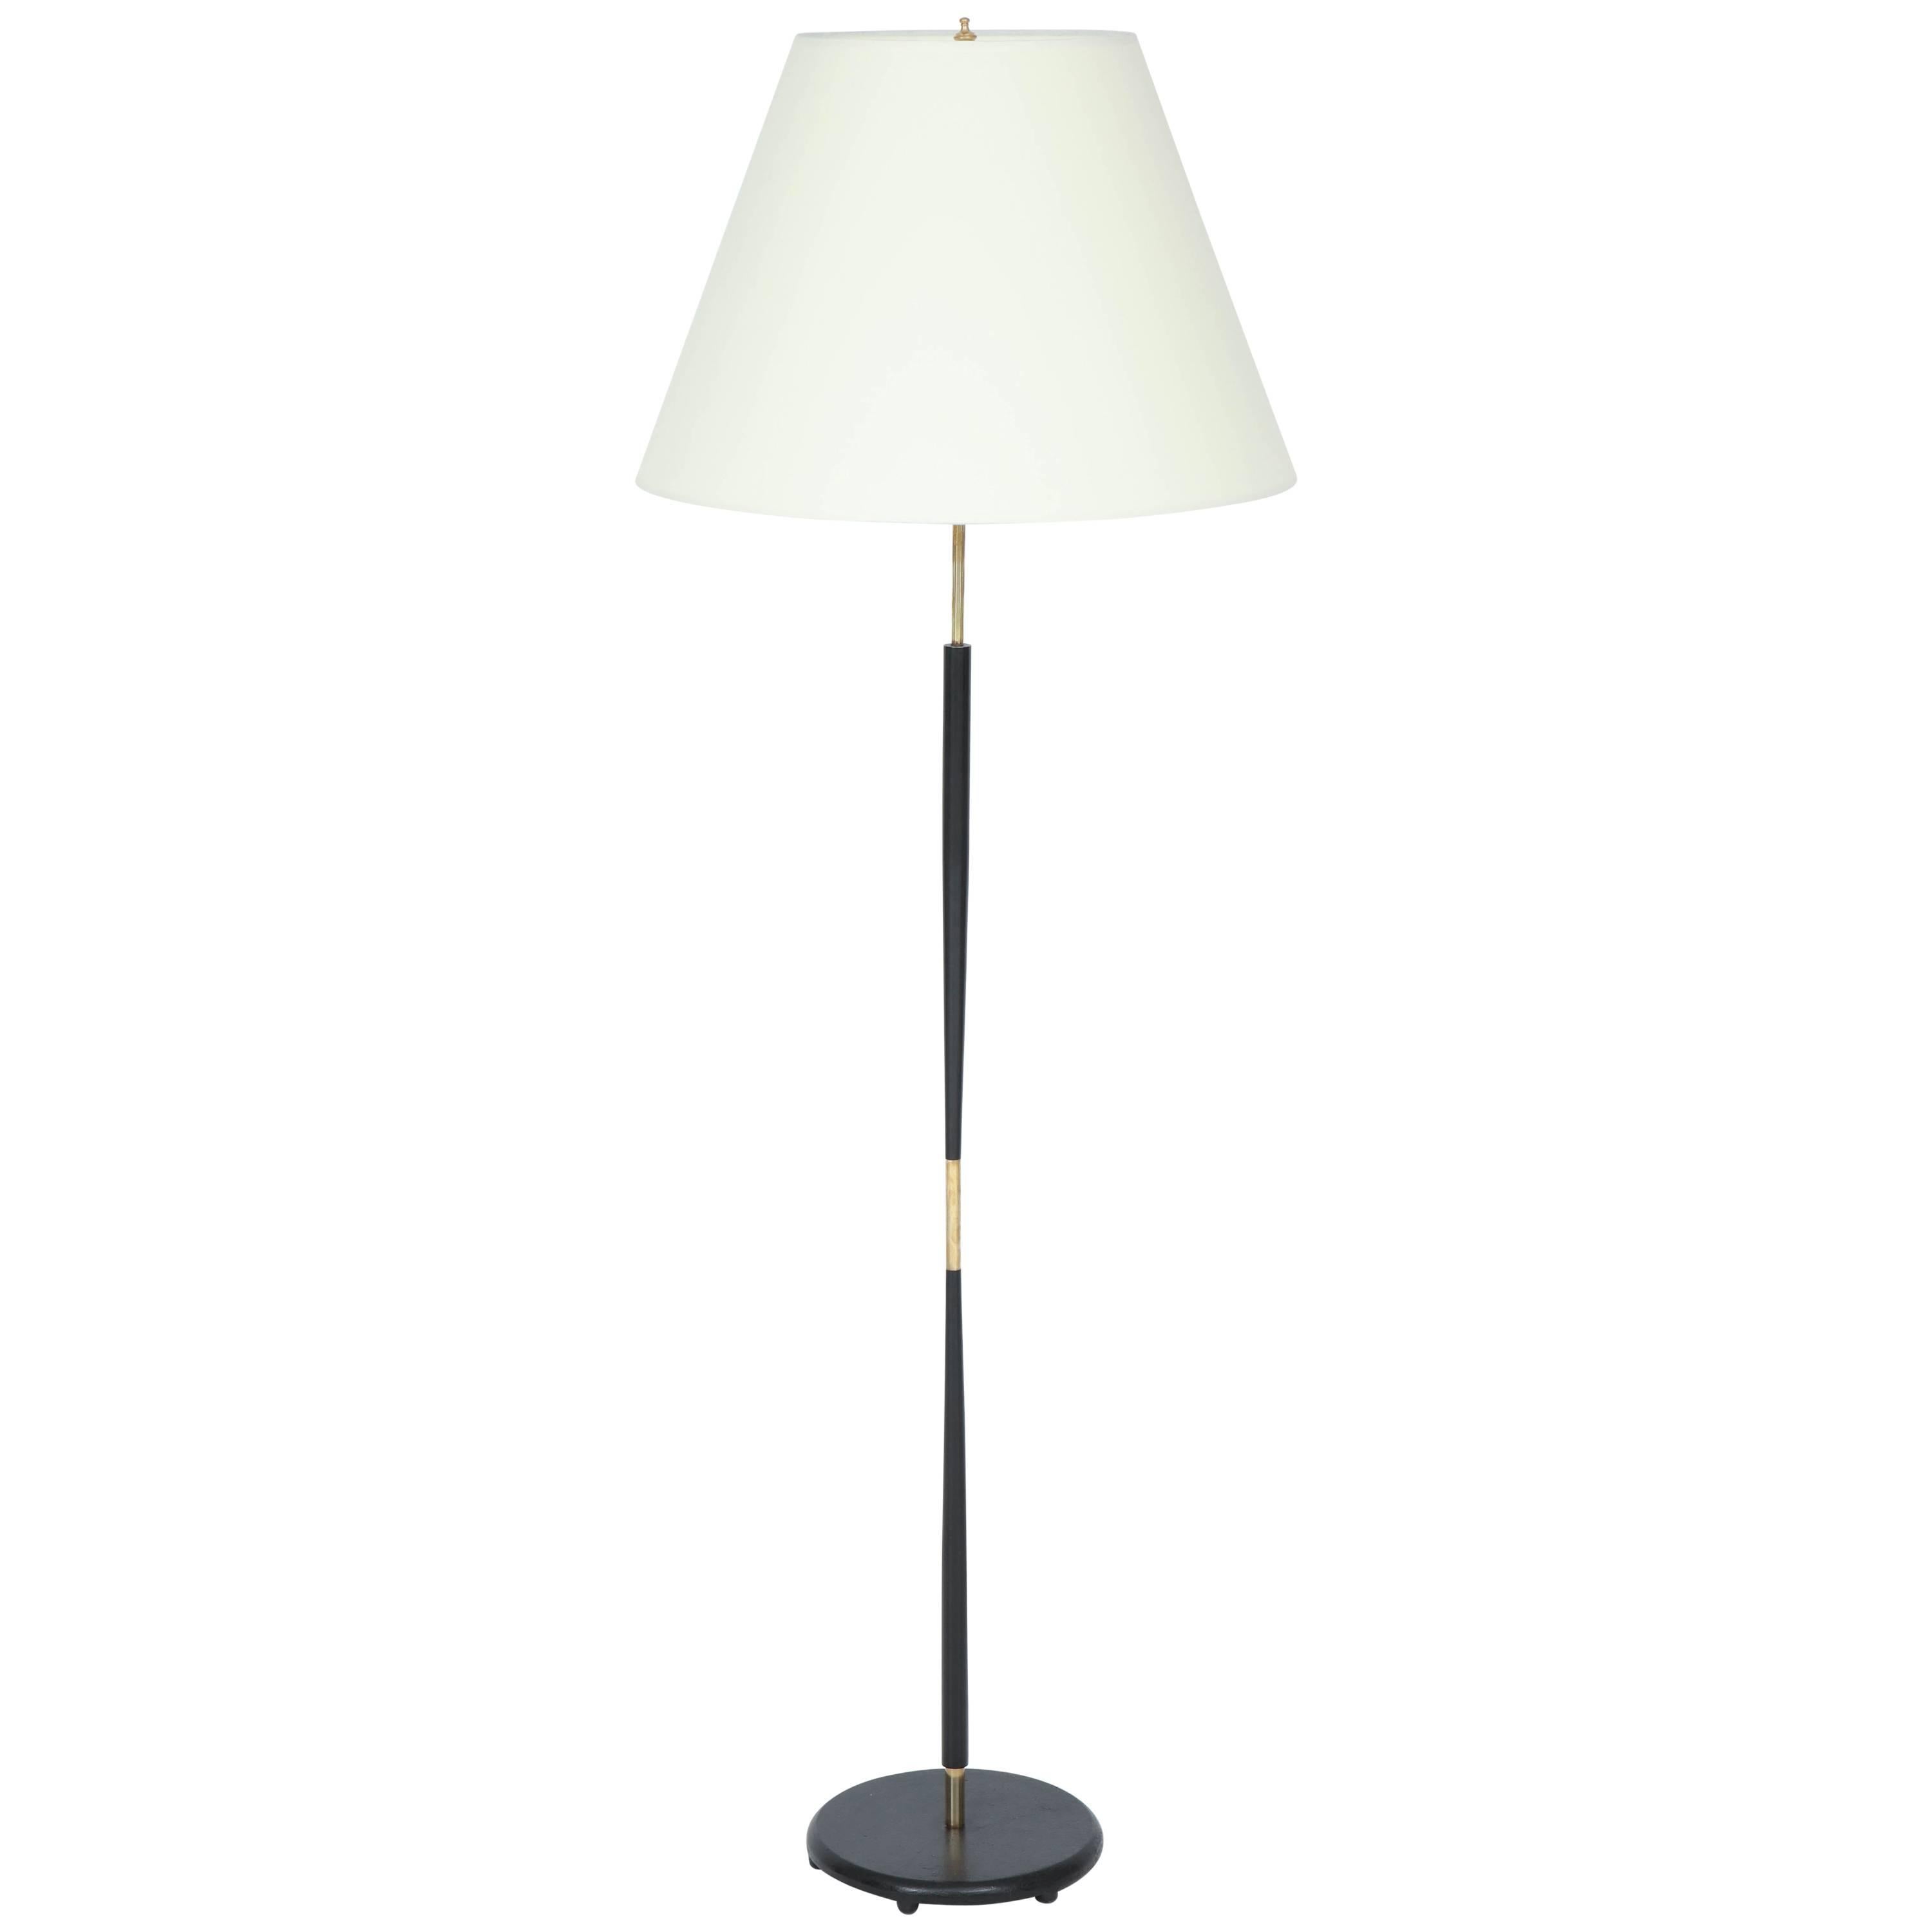 Danish Painted Steel and Brass Tapering Floor Lamp, circa 1940s